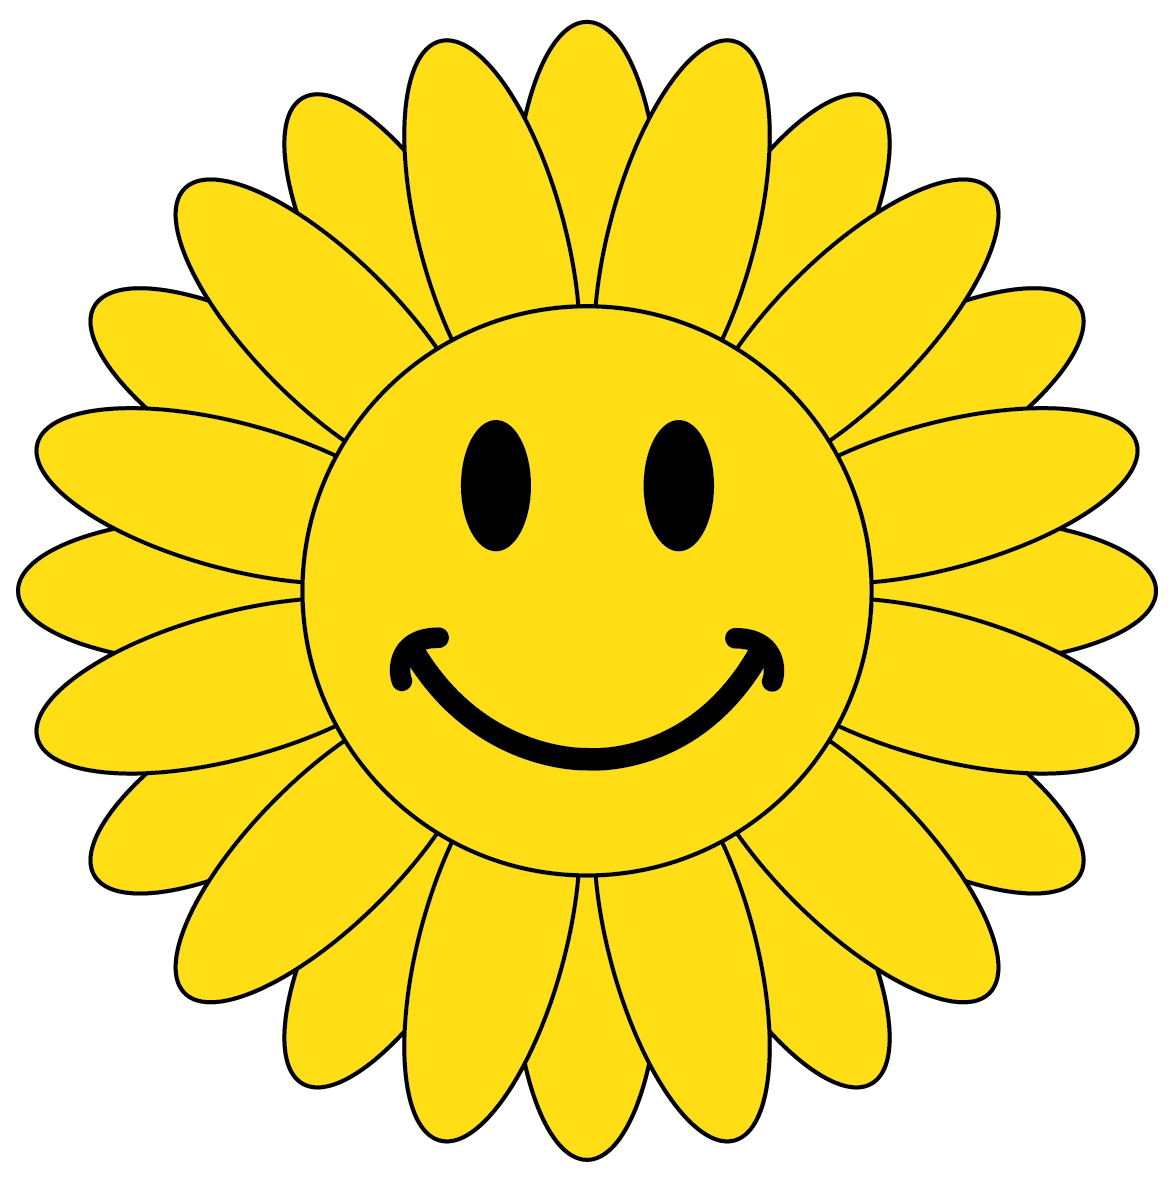 Daisy Smiley Faces - ClipArt Best